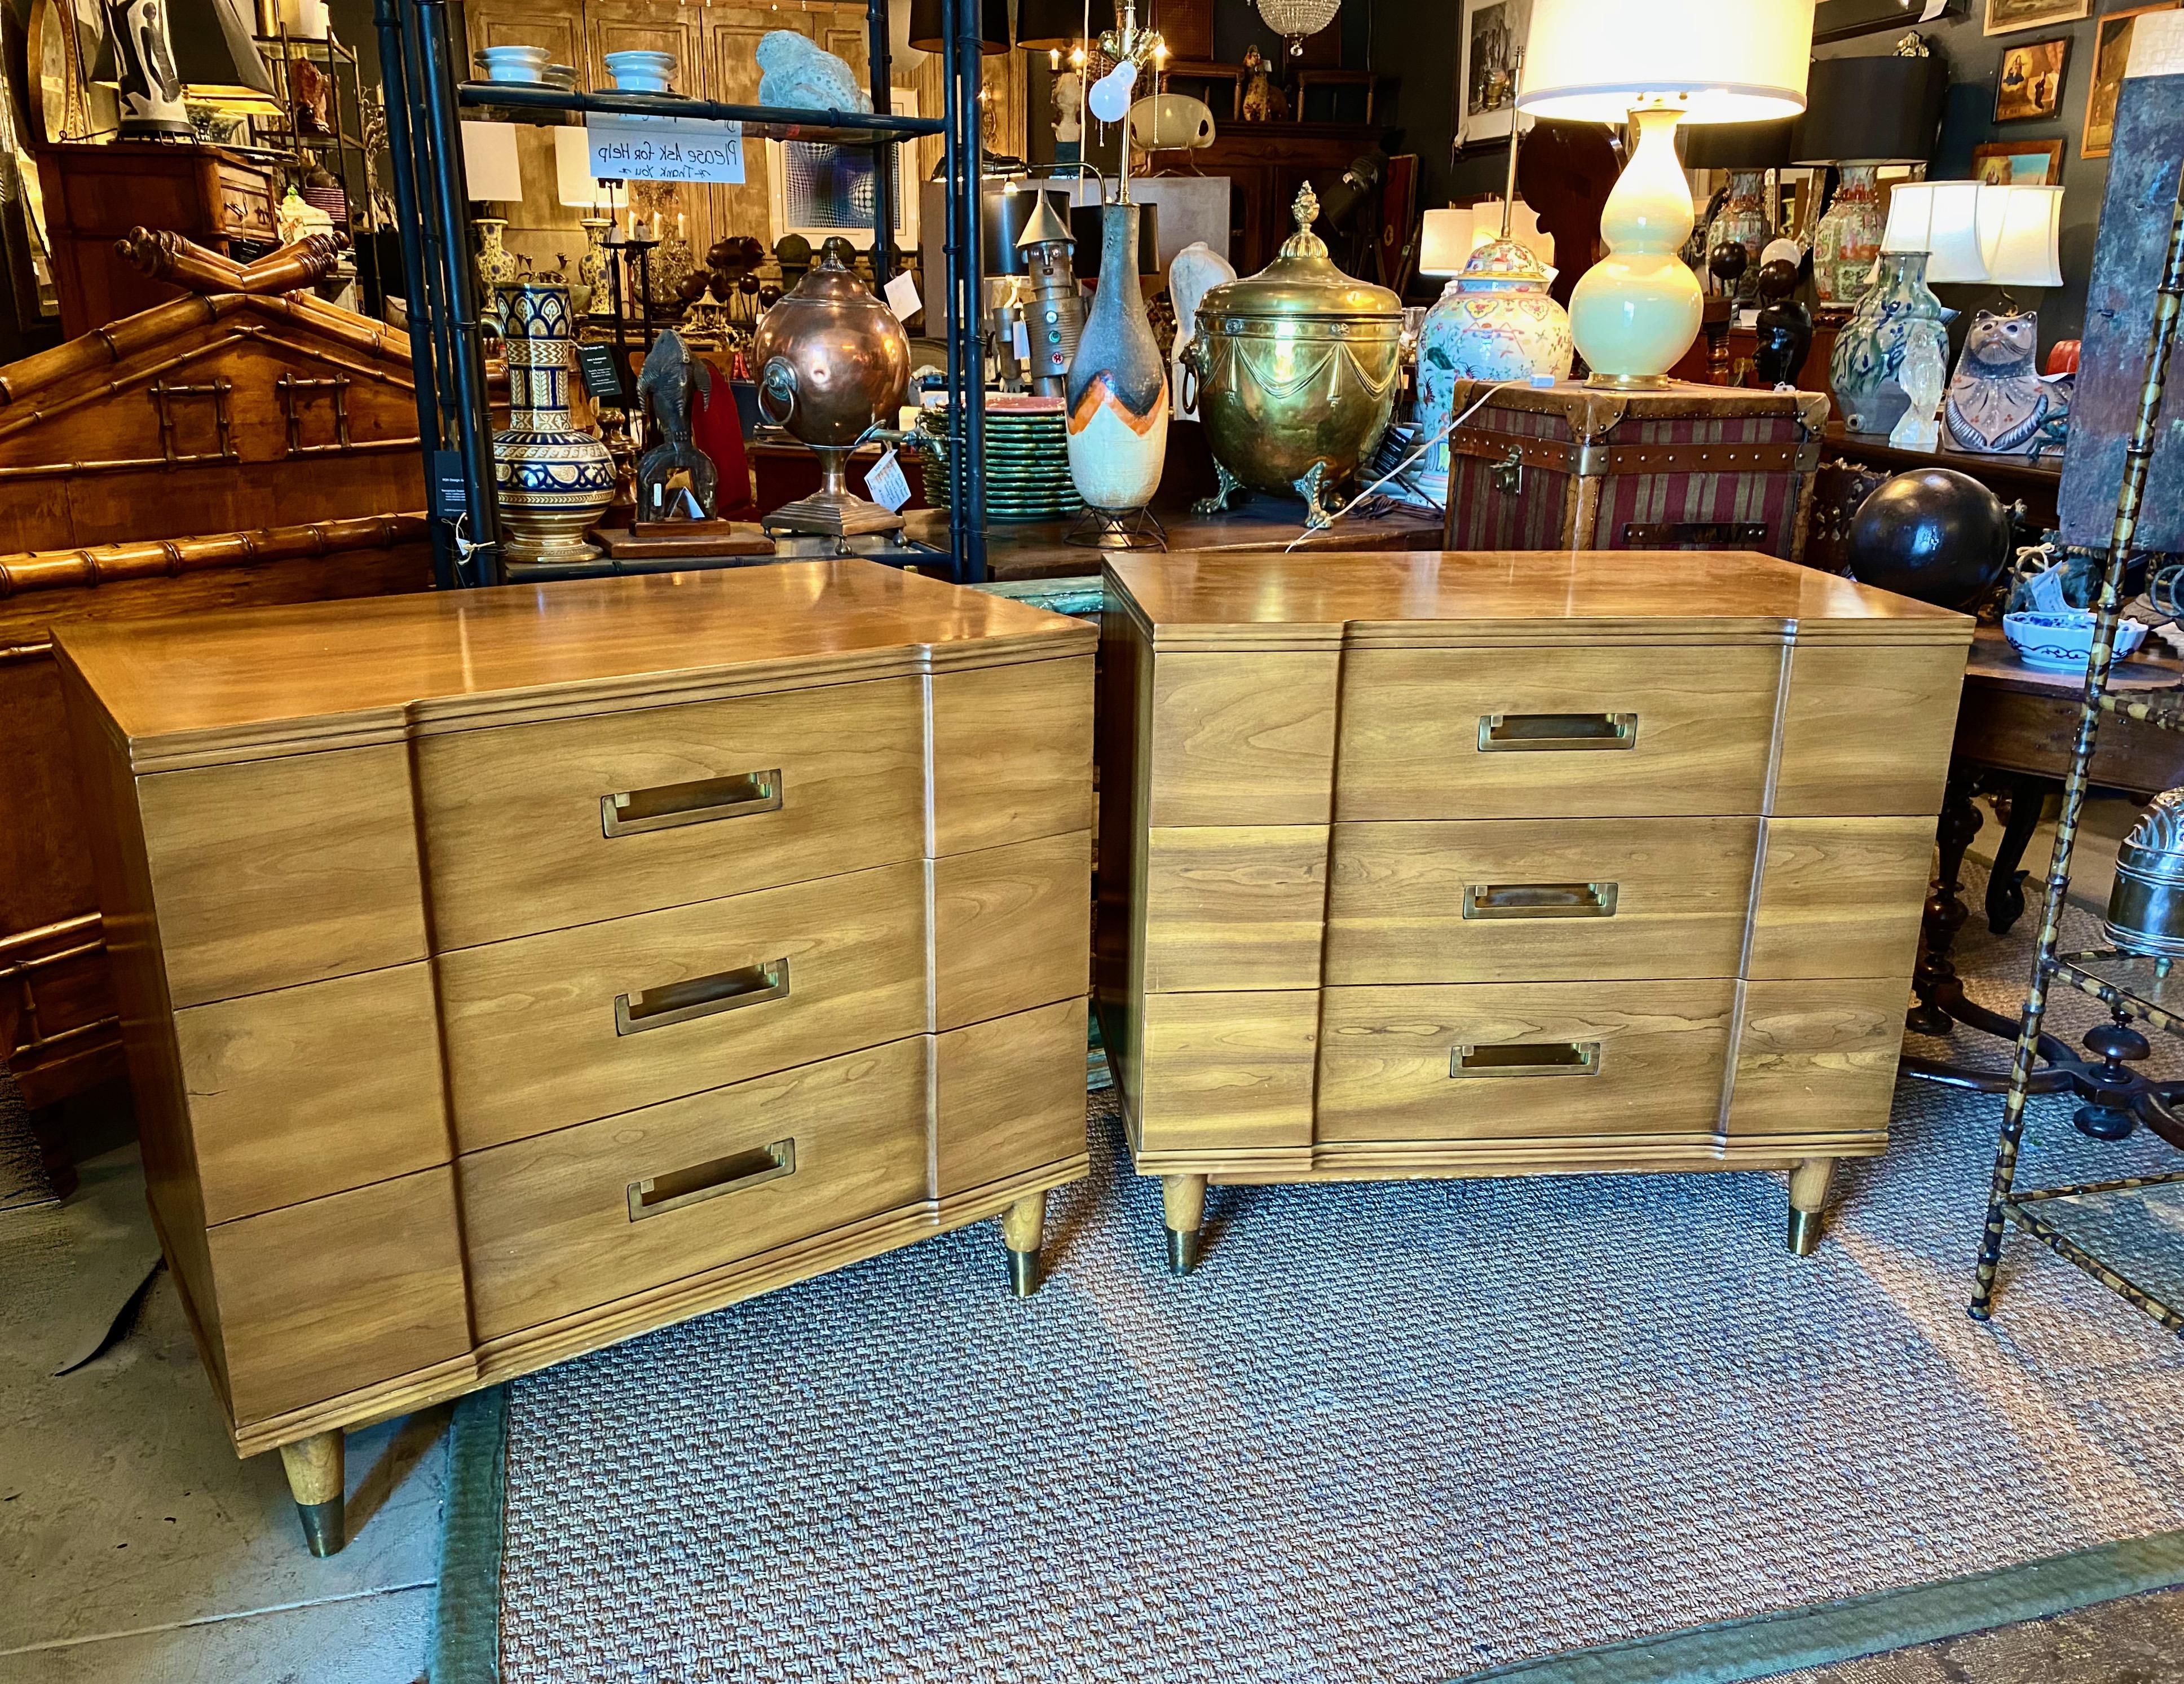 This a superb pair of c. 1955-1960 John Widdicomb chests of drawers in finely grained and figured claro walnut. The breakfront form of the chests is unusual and a mark of design quality. The sculptural brass hardware has been buffed and is in